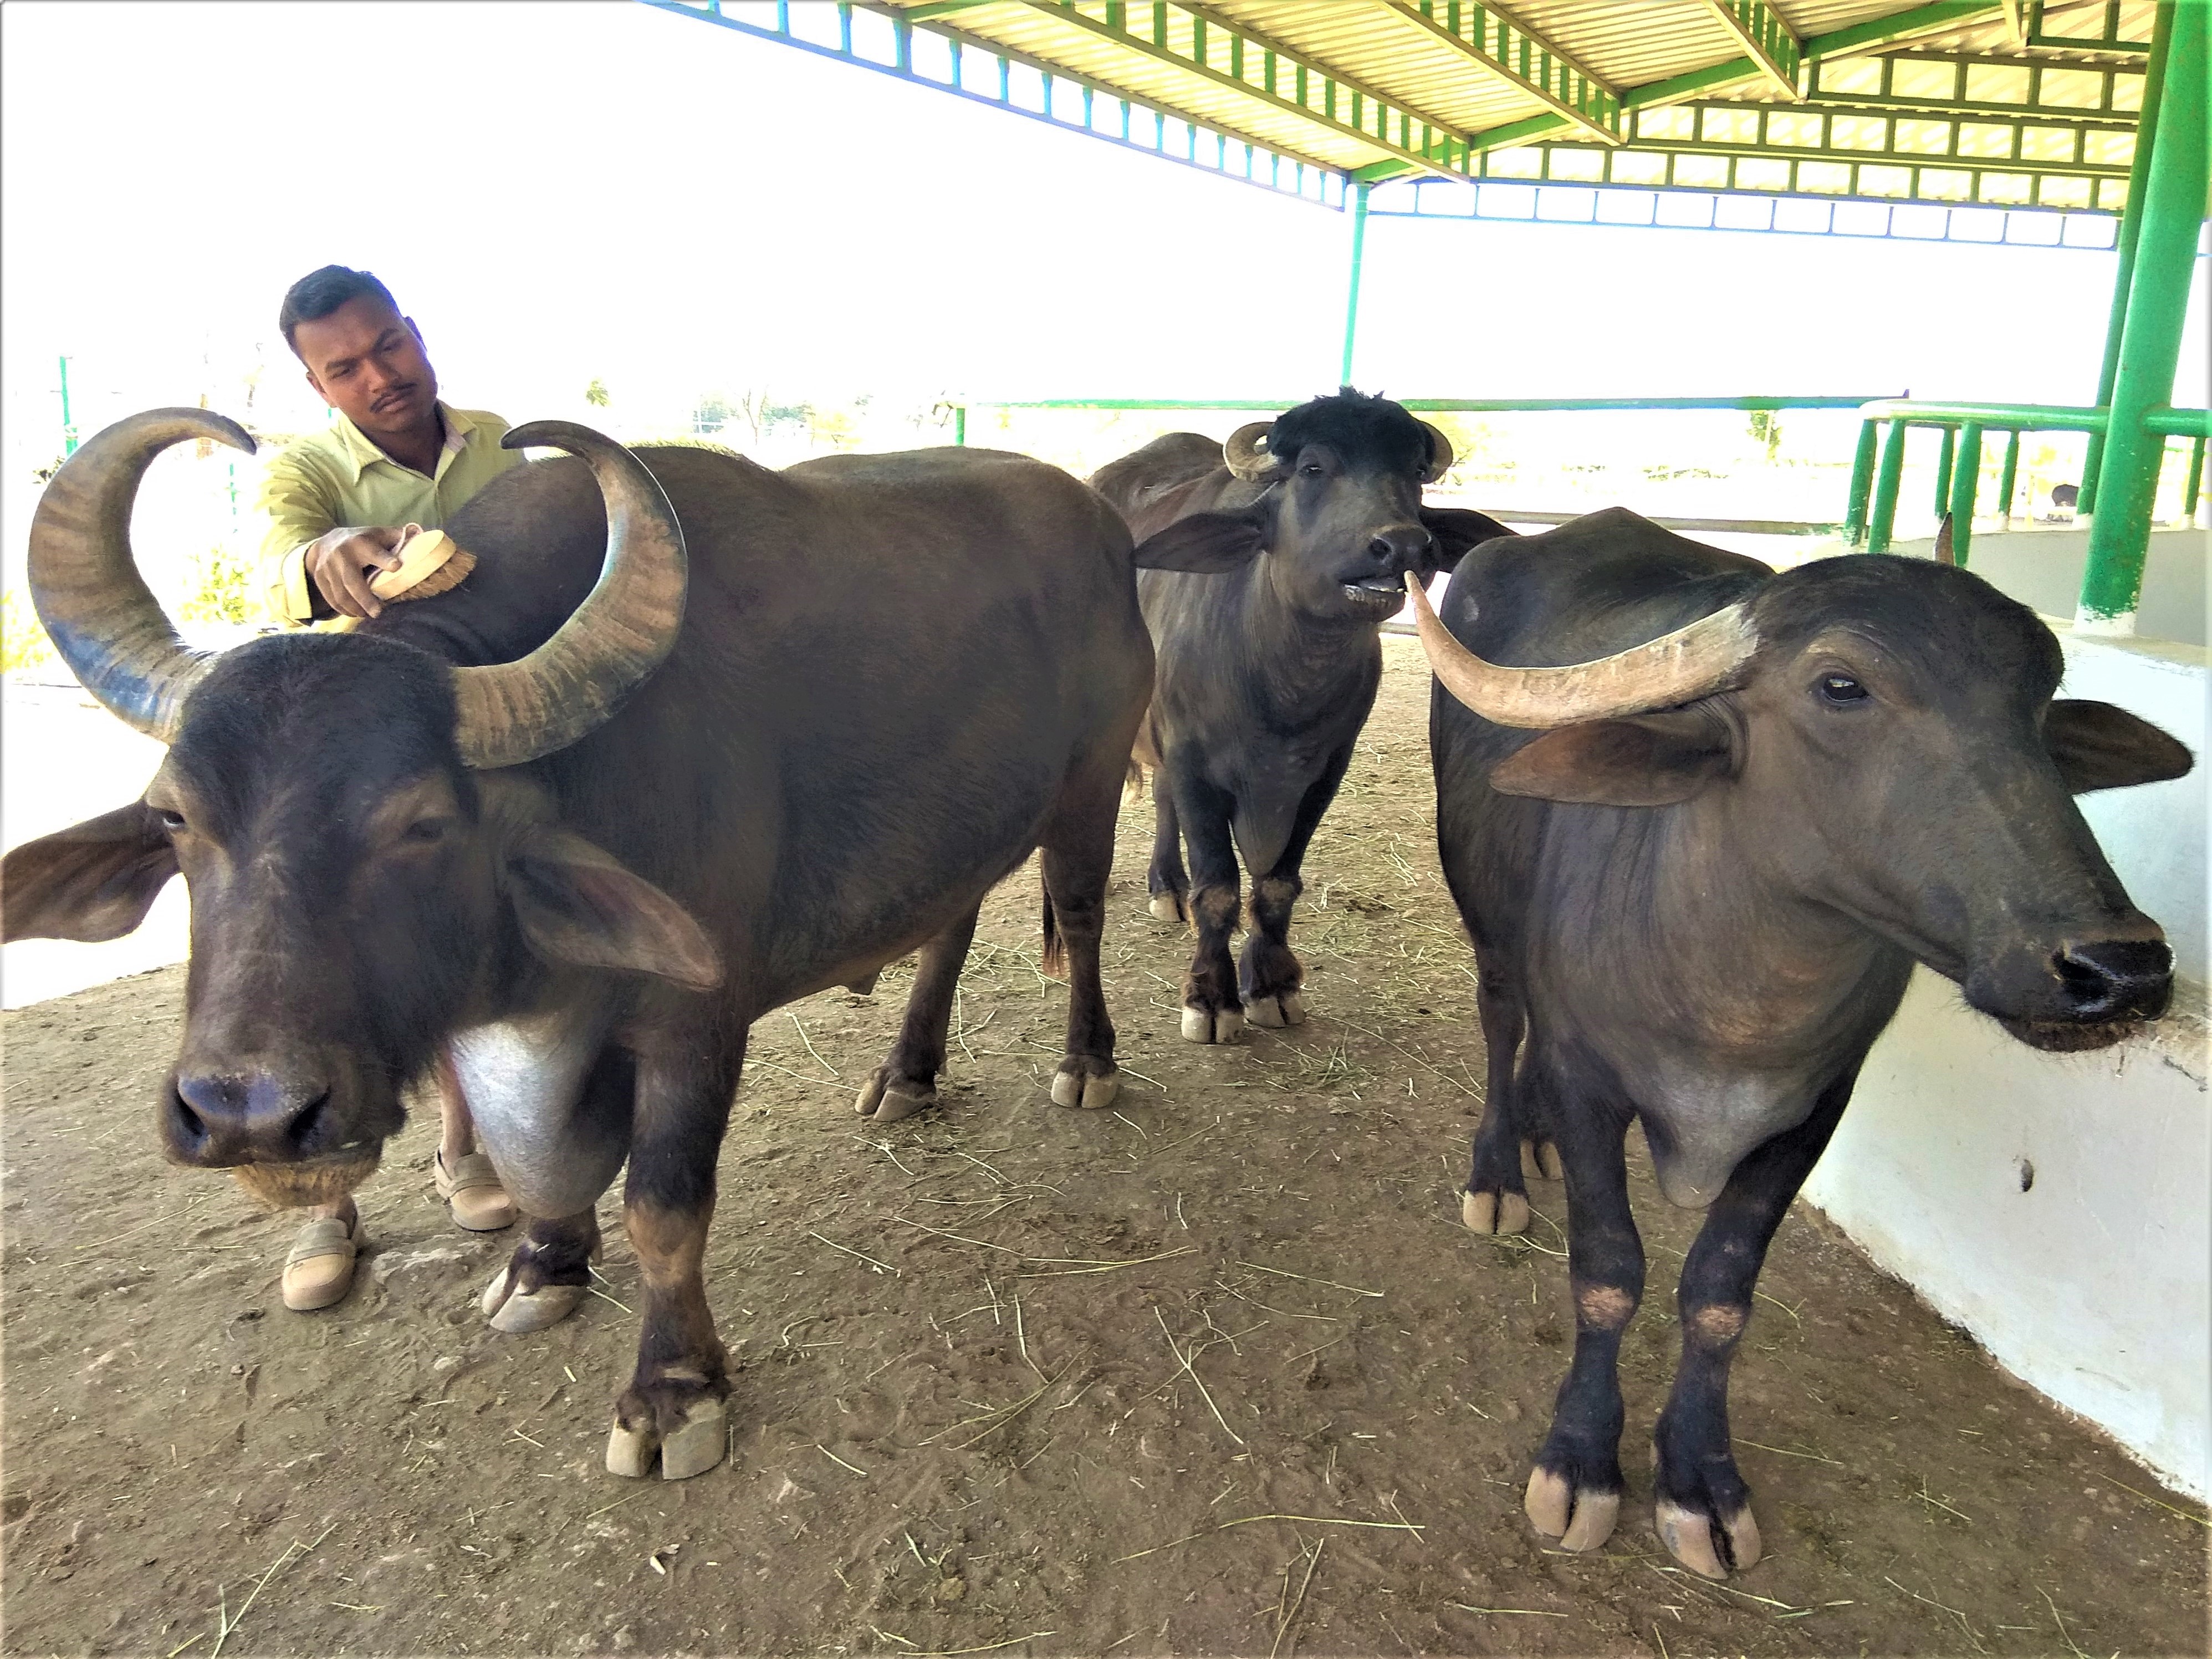 Rescued water buffaloes make grooming a group activity as Lalu and Mahesh wait for Kalu to finish his turn.